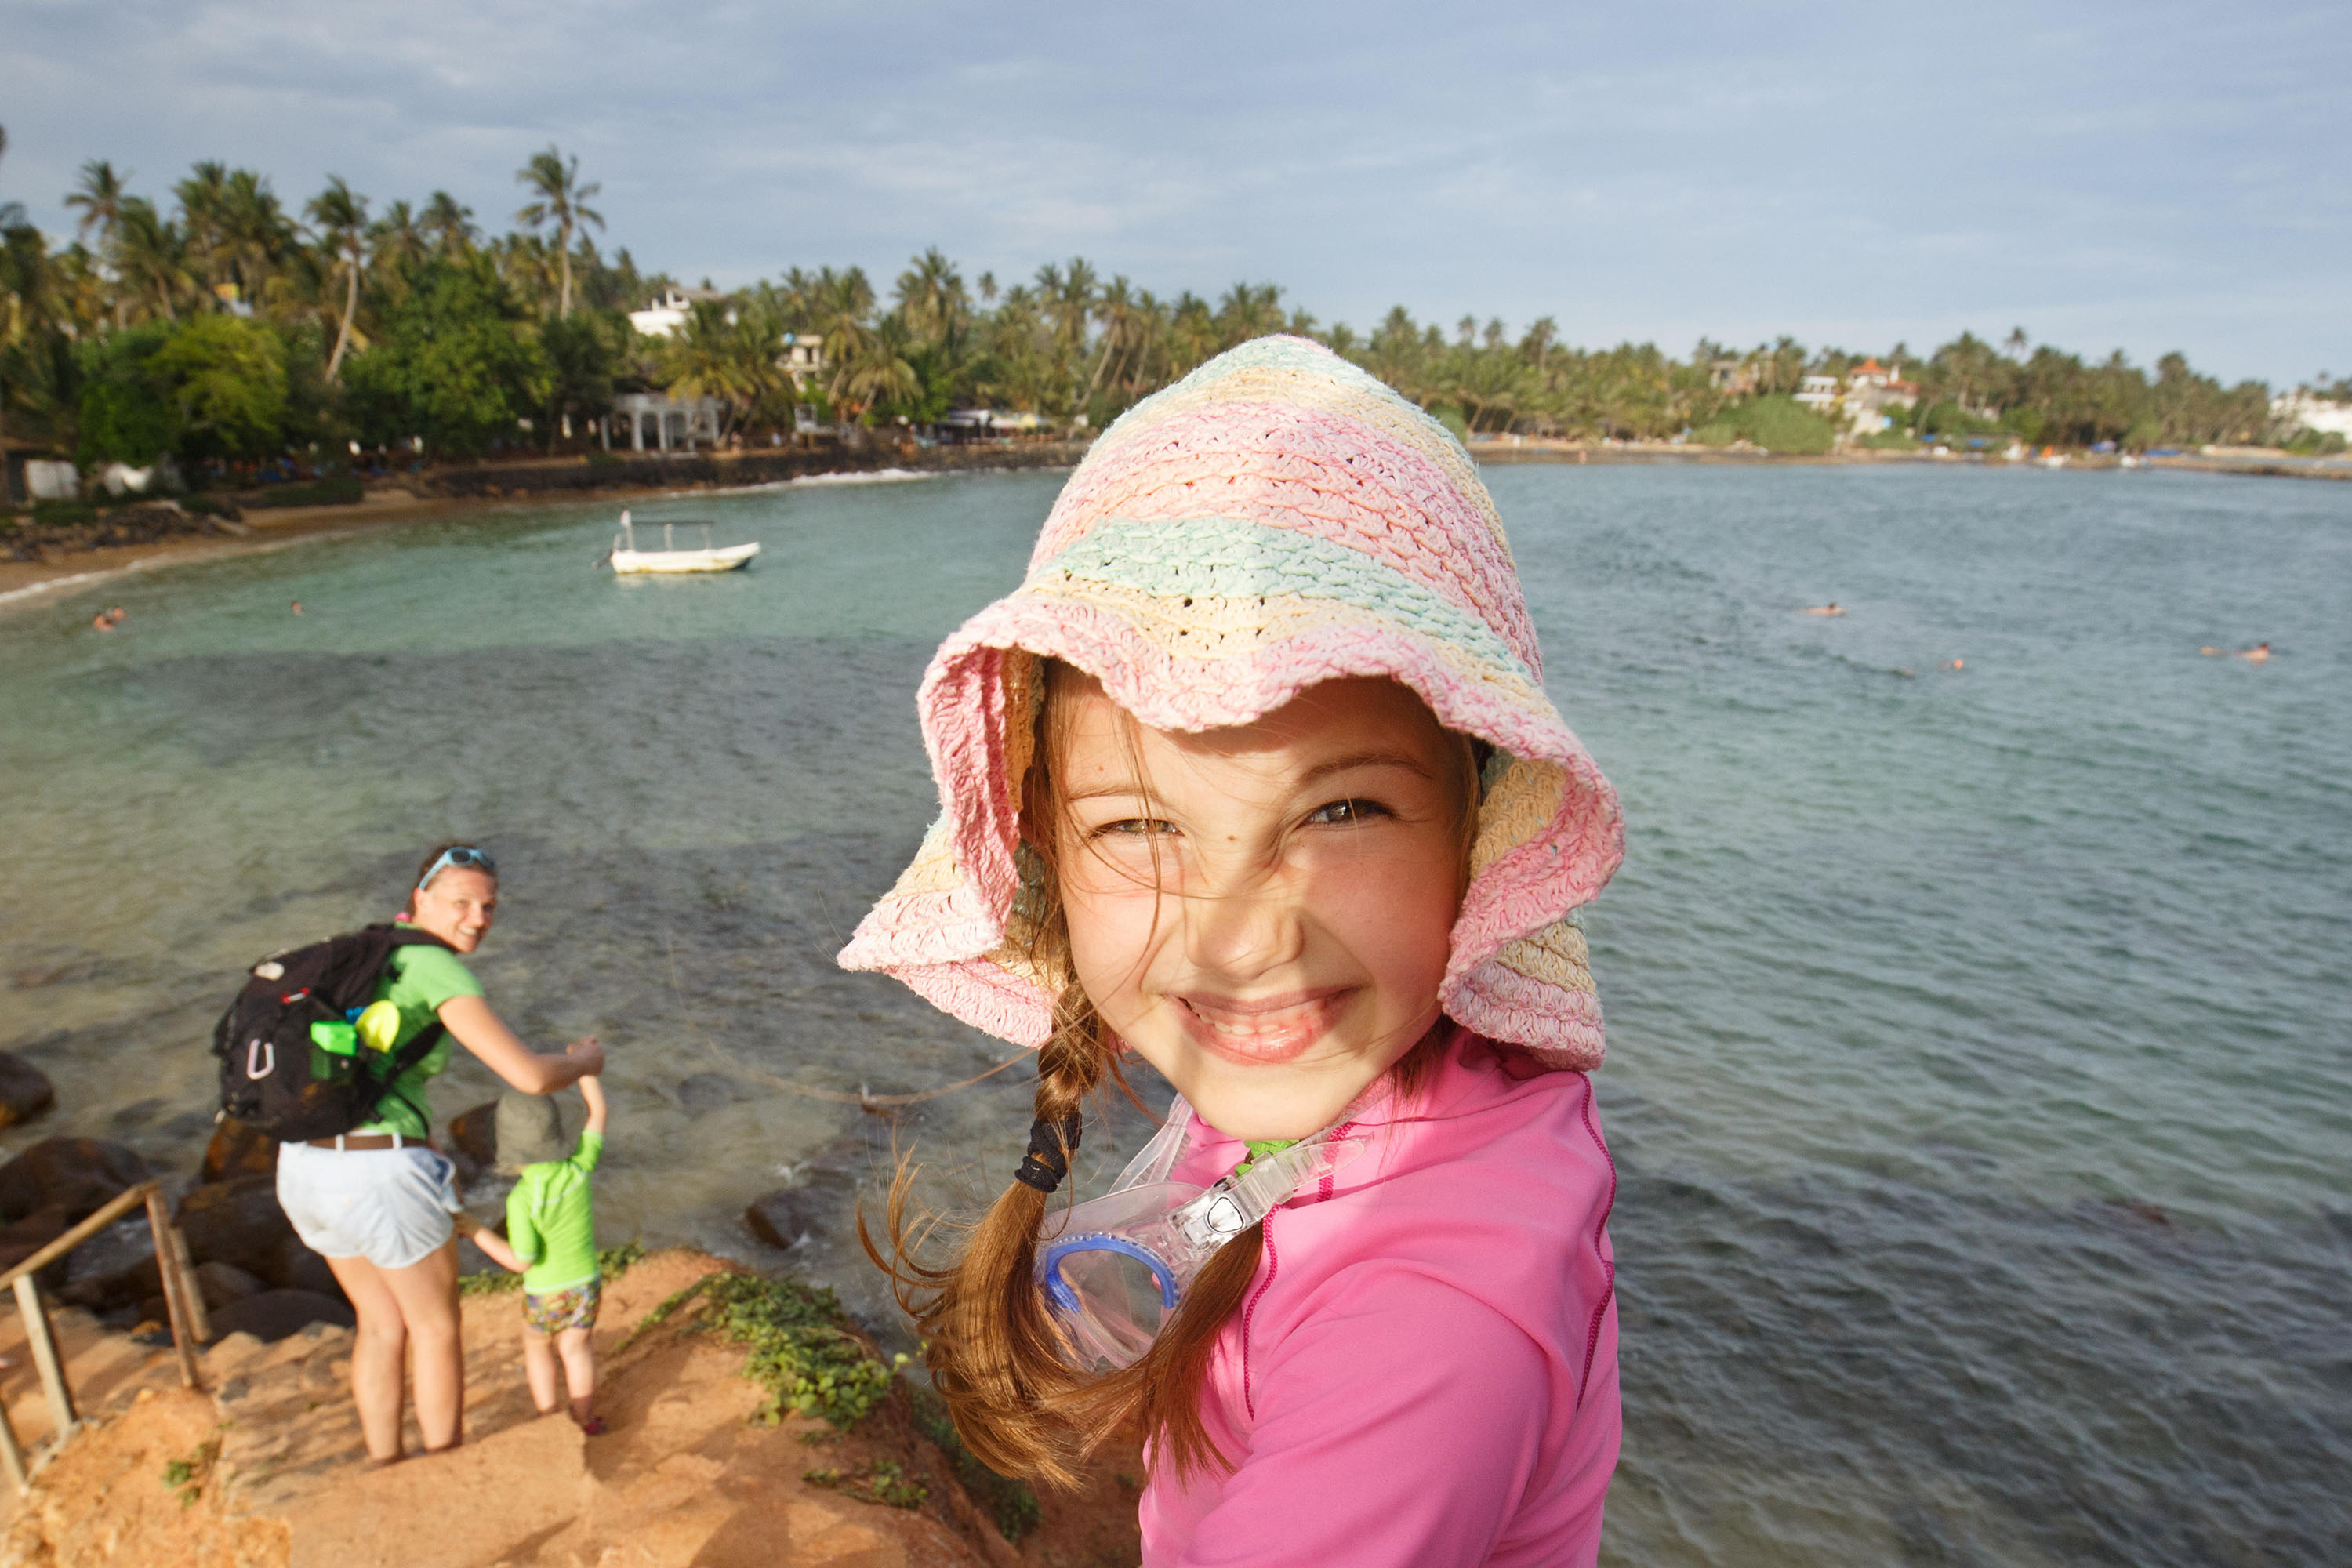 A small girl in a pink sun hat at the beach.